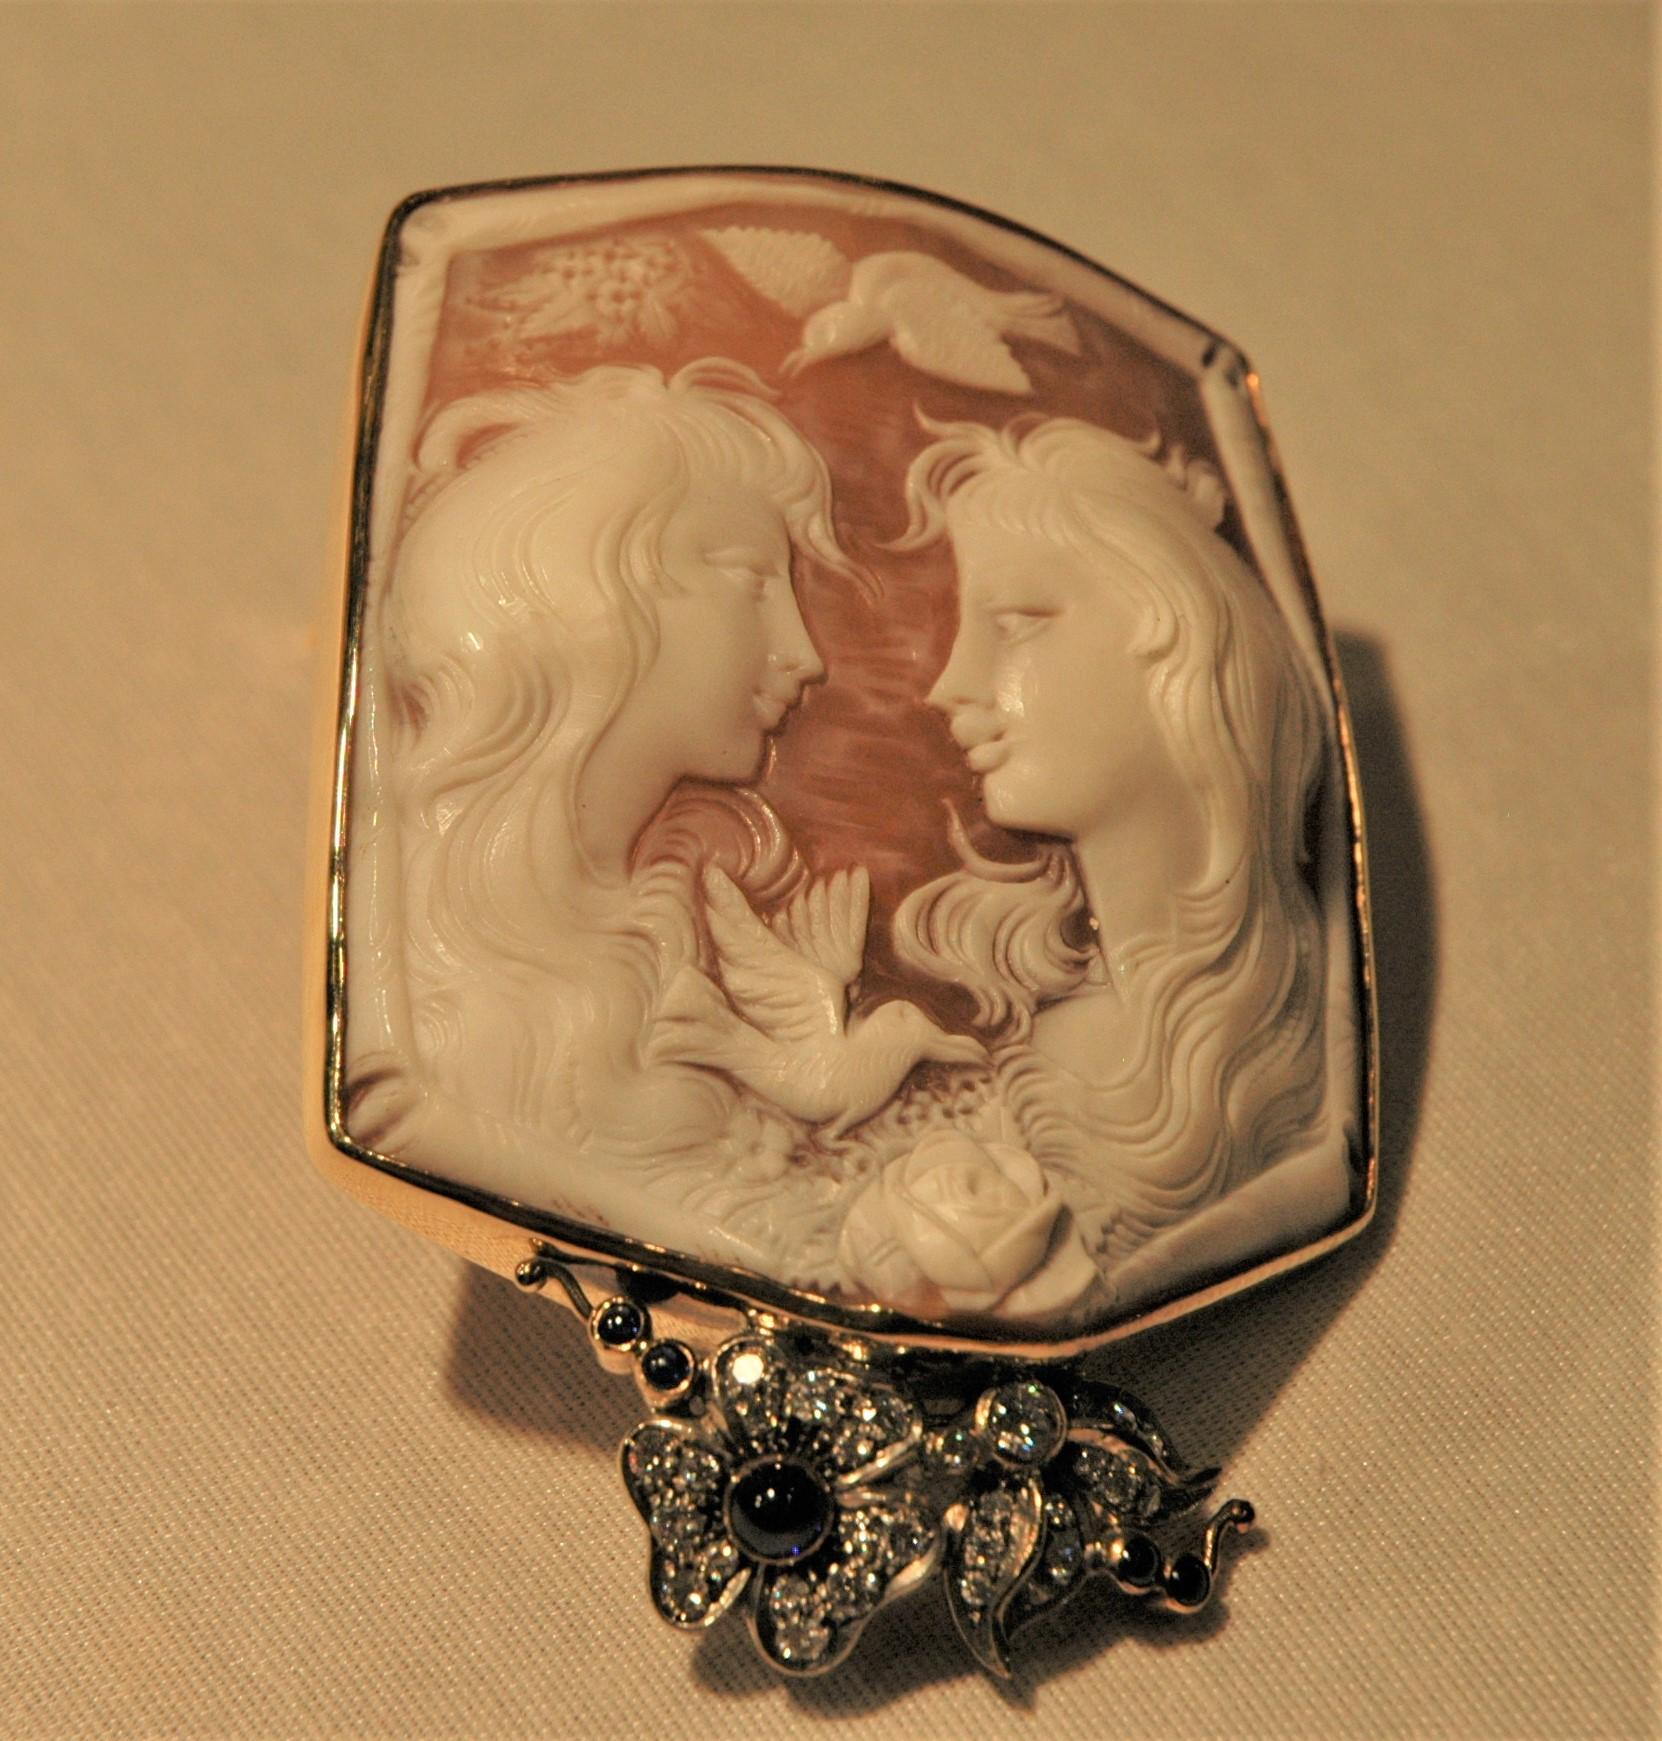 This is a very special cameo brooch, handmade in Italy. It represents two women, the one in front of the other, located in a bucolic setting: there are some flowers and two birds. The manufacturing of the cameos is a typical processing of Torre del